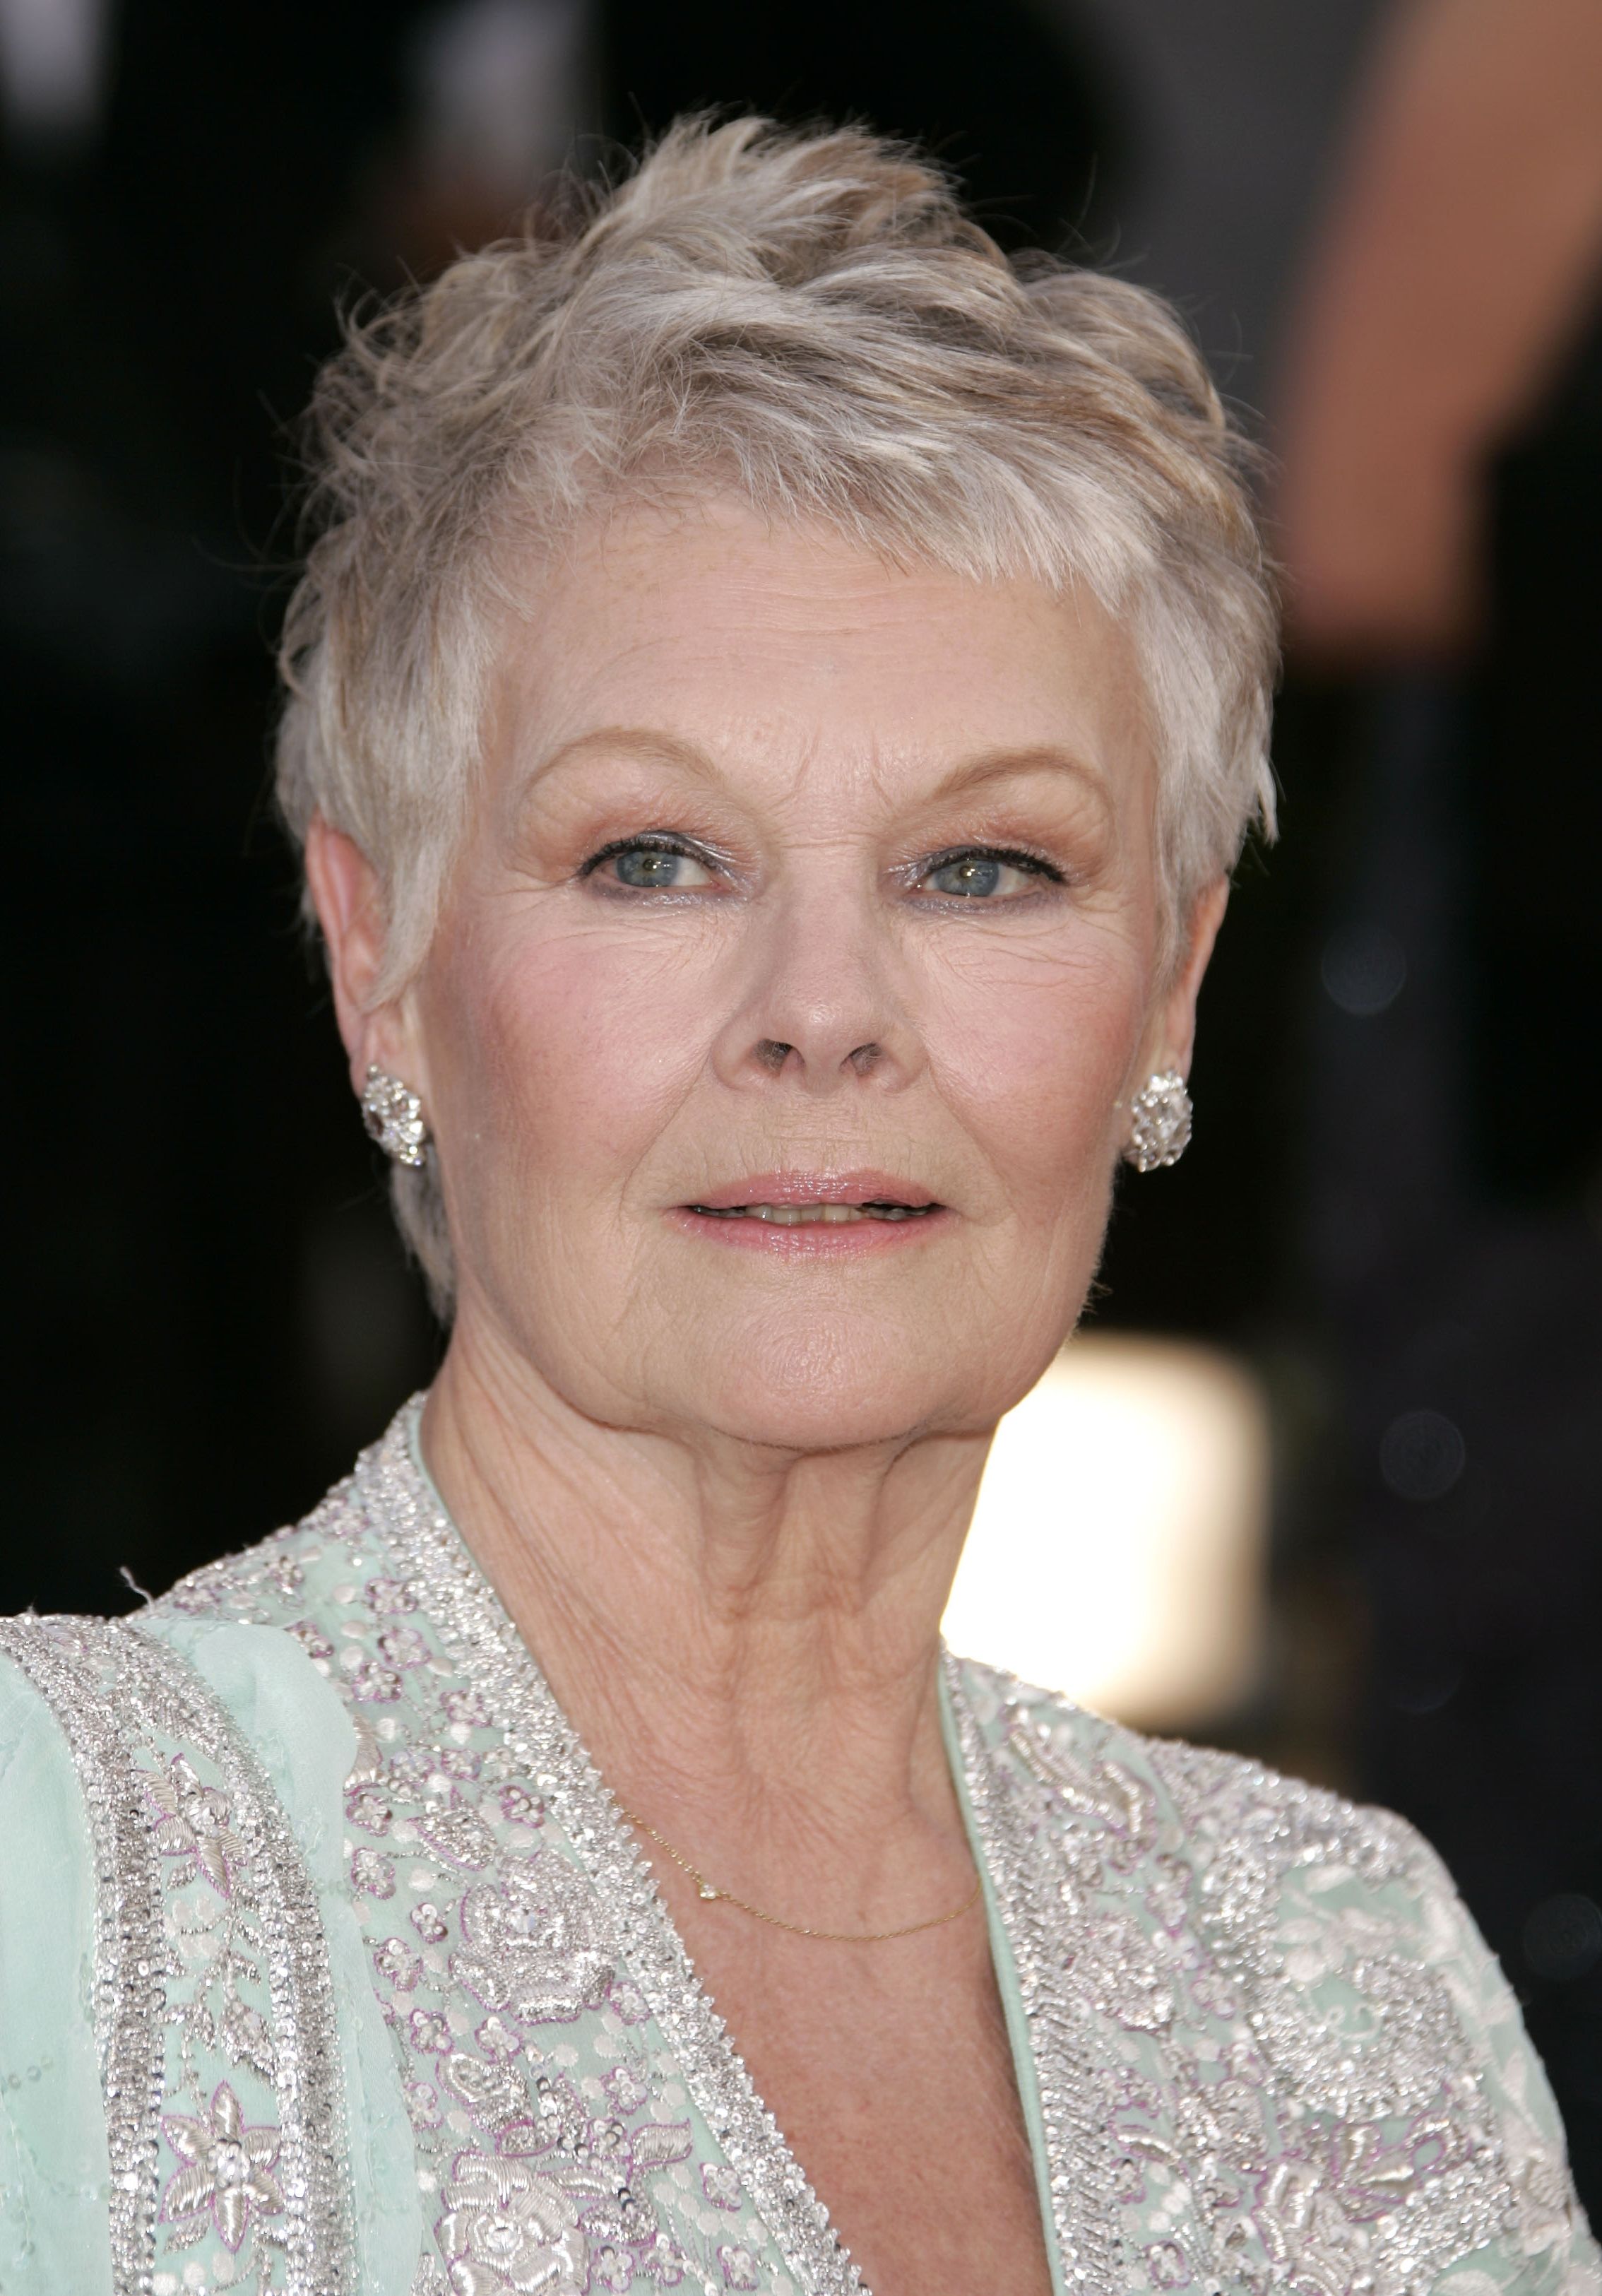 The Best Exotic Haircut? | Judi Dench, Hair Style And Medium Hair With Regard To Most Recent Judi Dench Pixie Hairstyles (View 2 of 15)